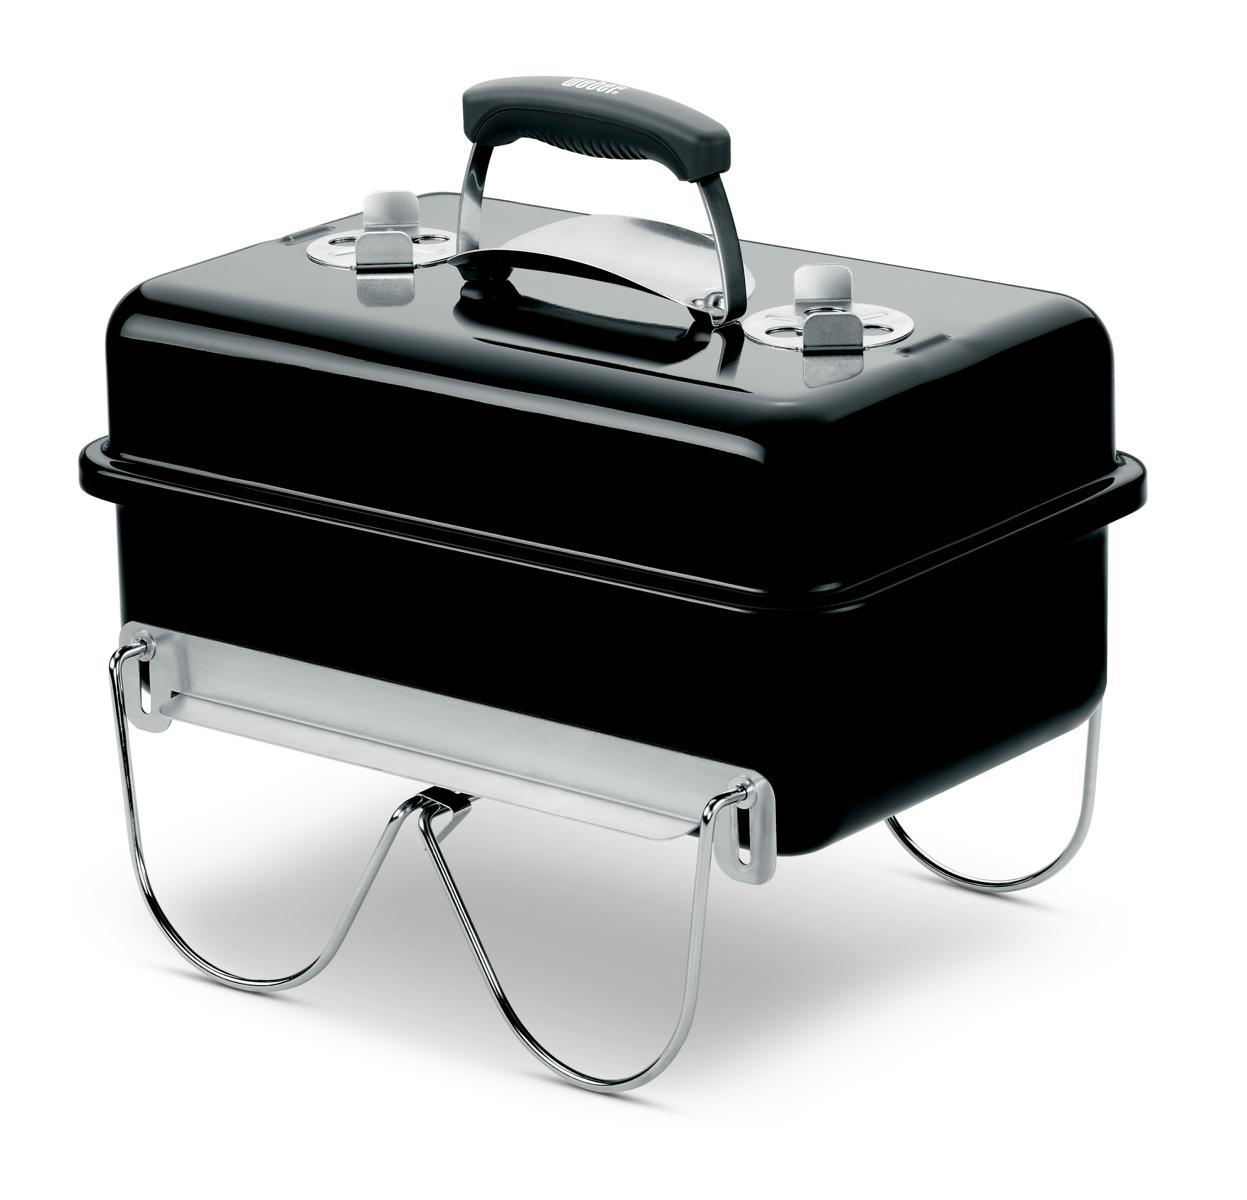 Go-Anywhere Charcoal Grill, Black<br>